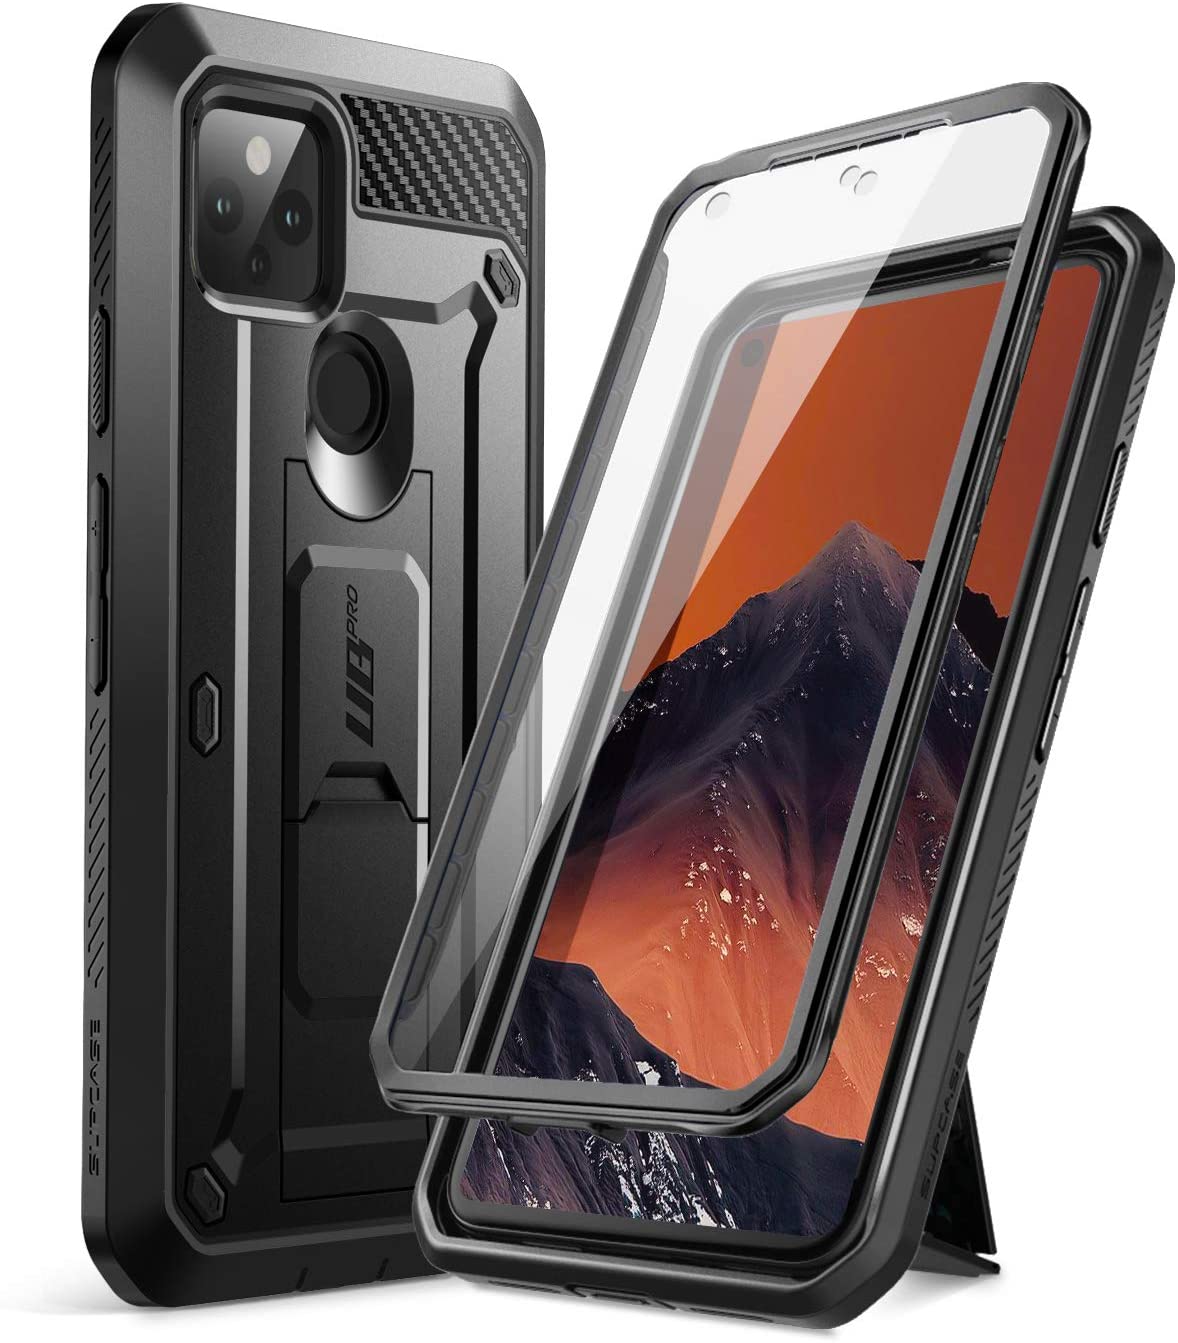 SUPCASE Unicorn Beetle Pro Google Pixel 5 Full-Body Rugged Holster Case with Built-in Screen Protector (Black)